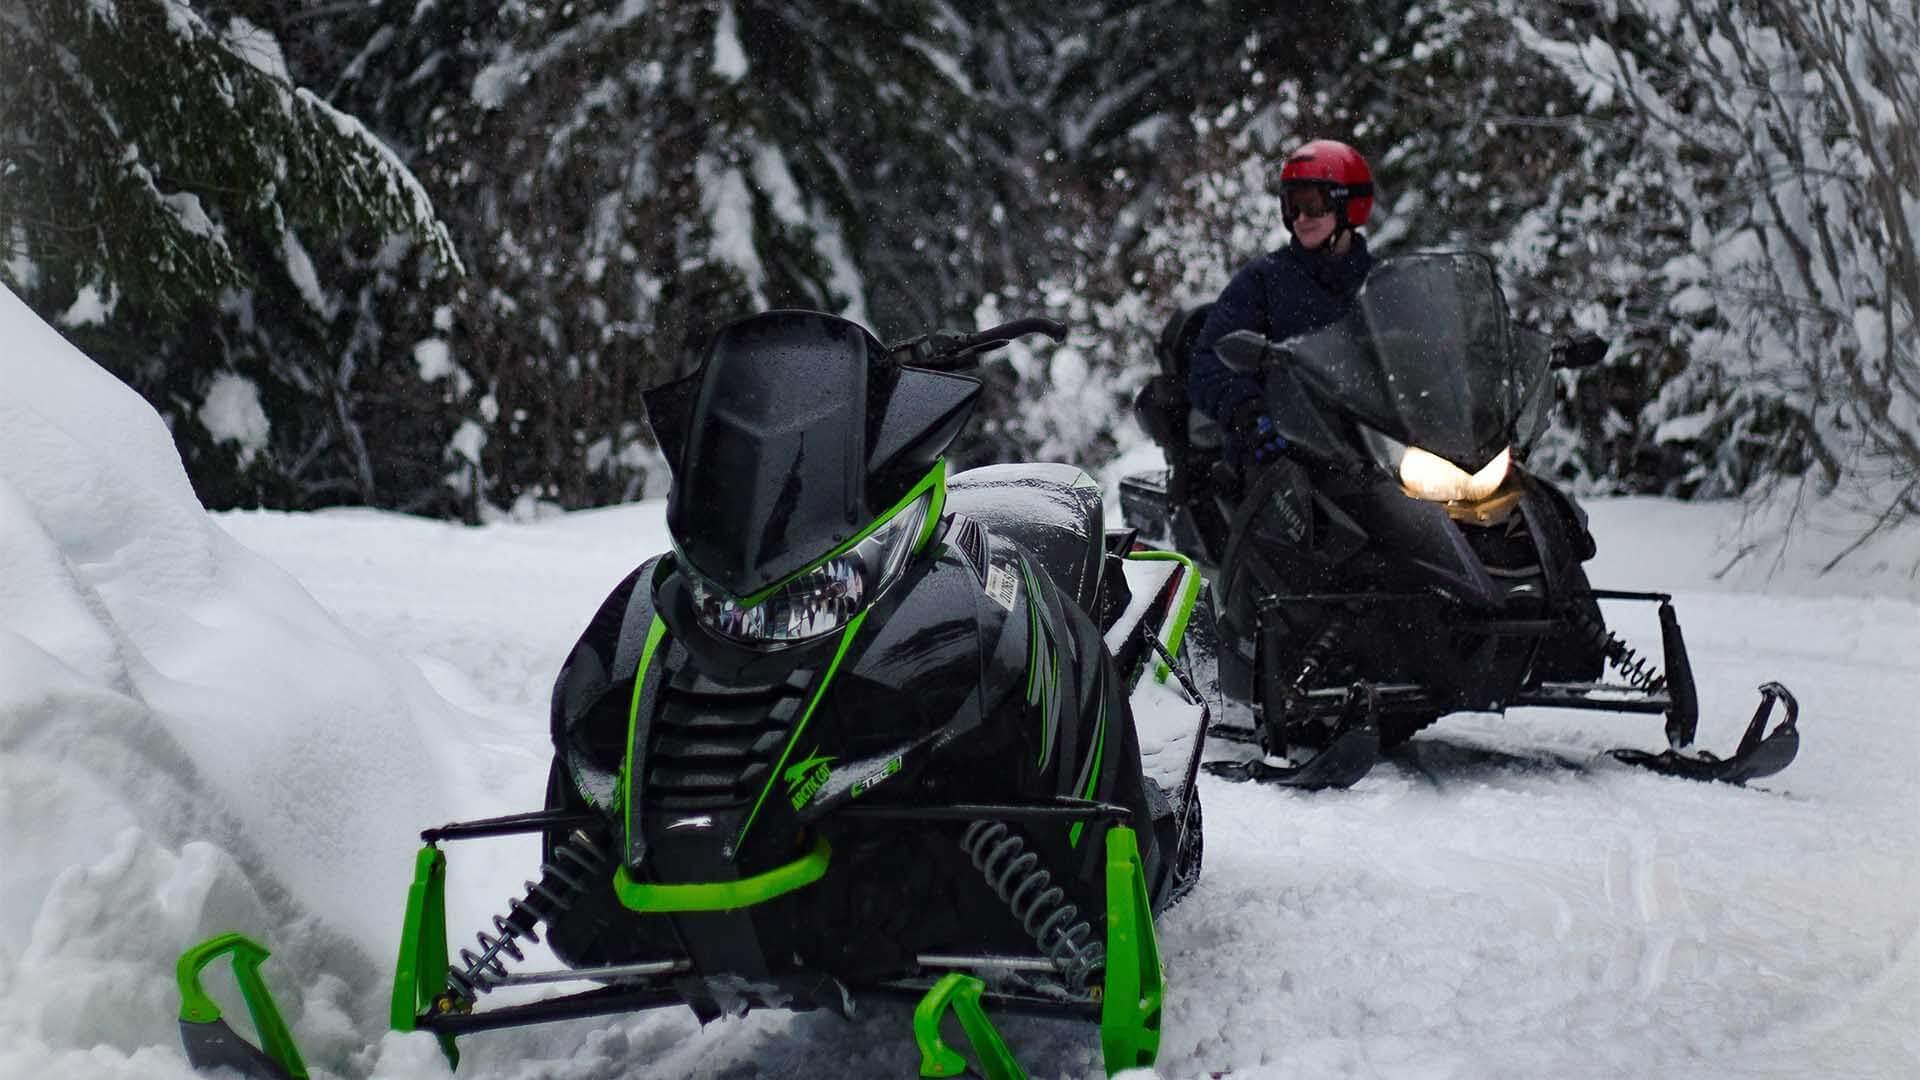 Parked snowmobiles with accumulating snow